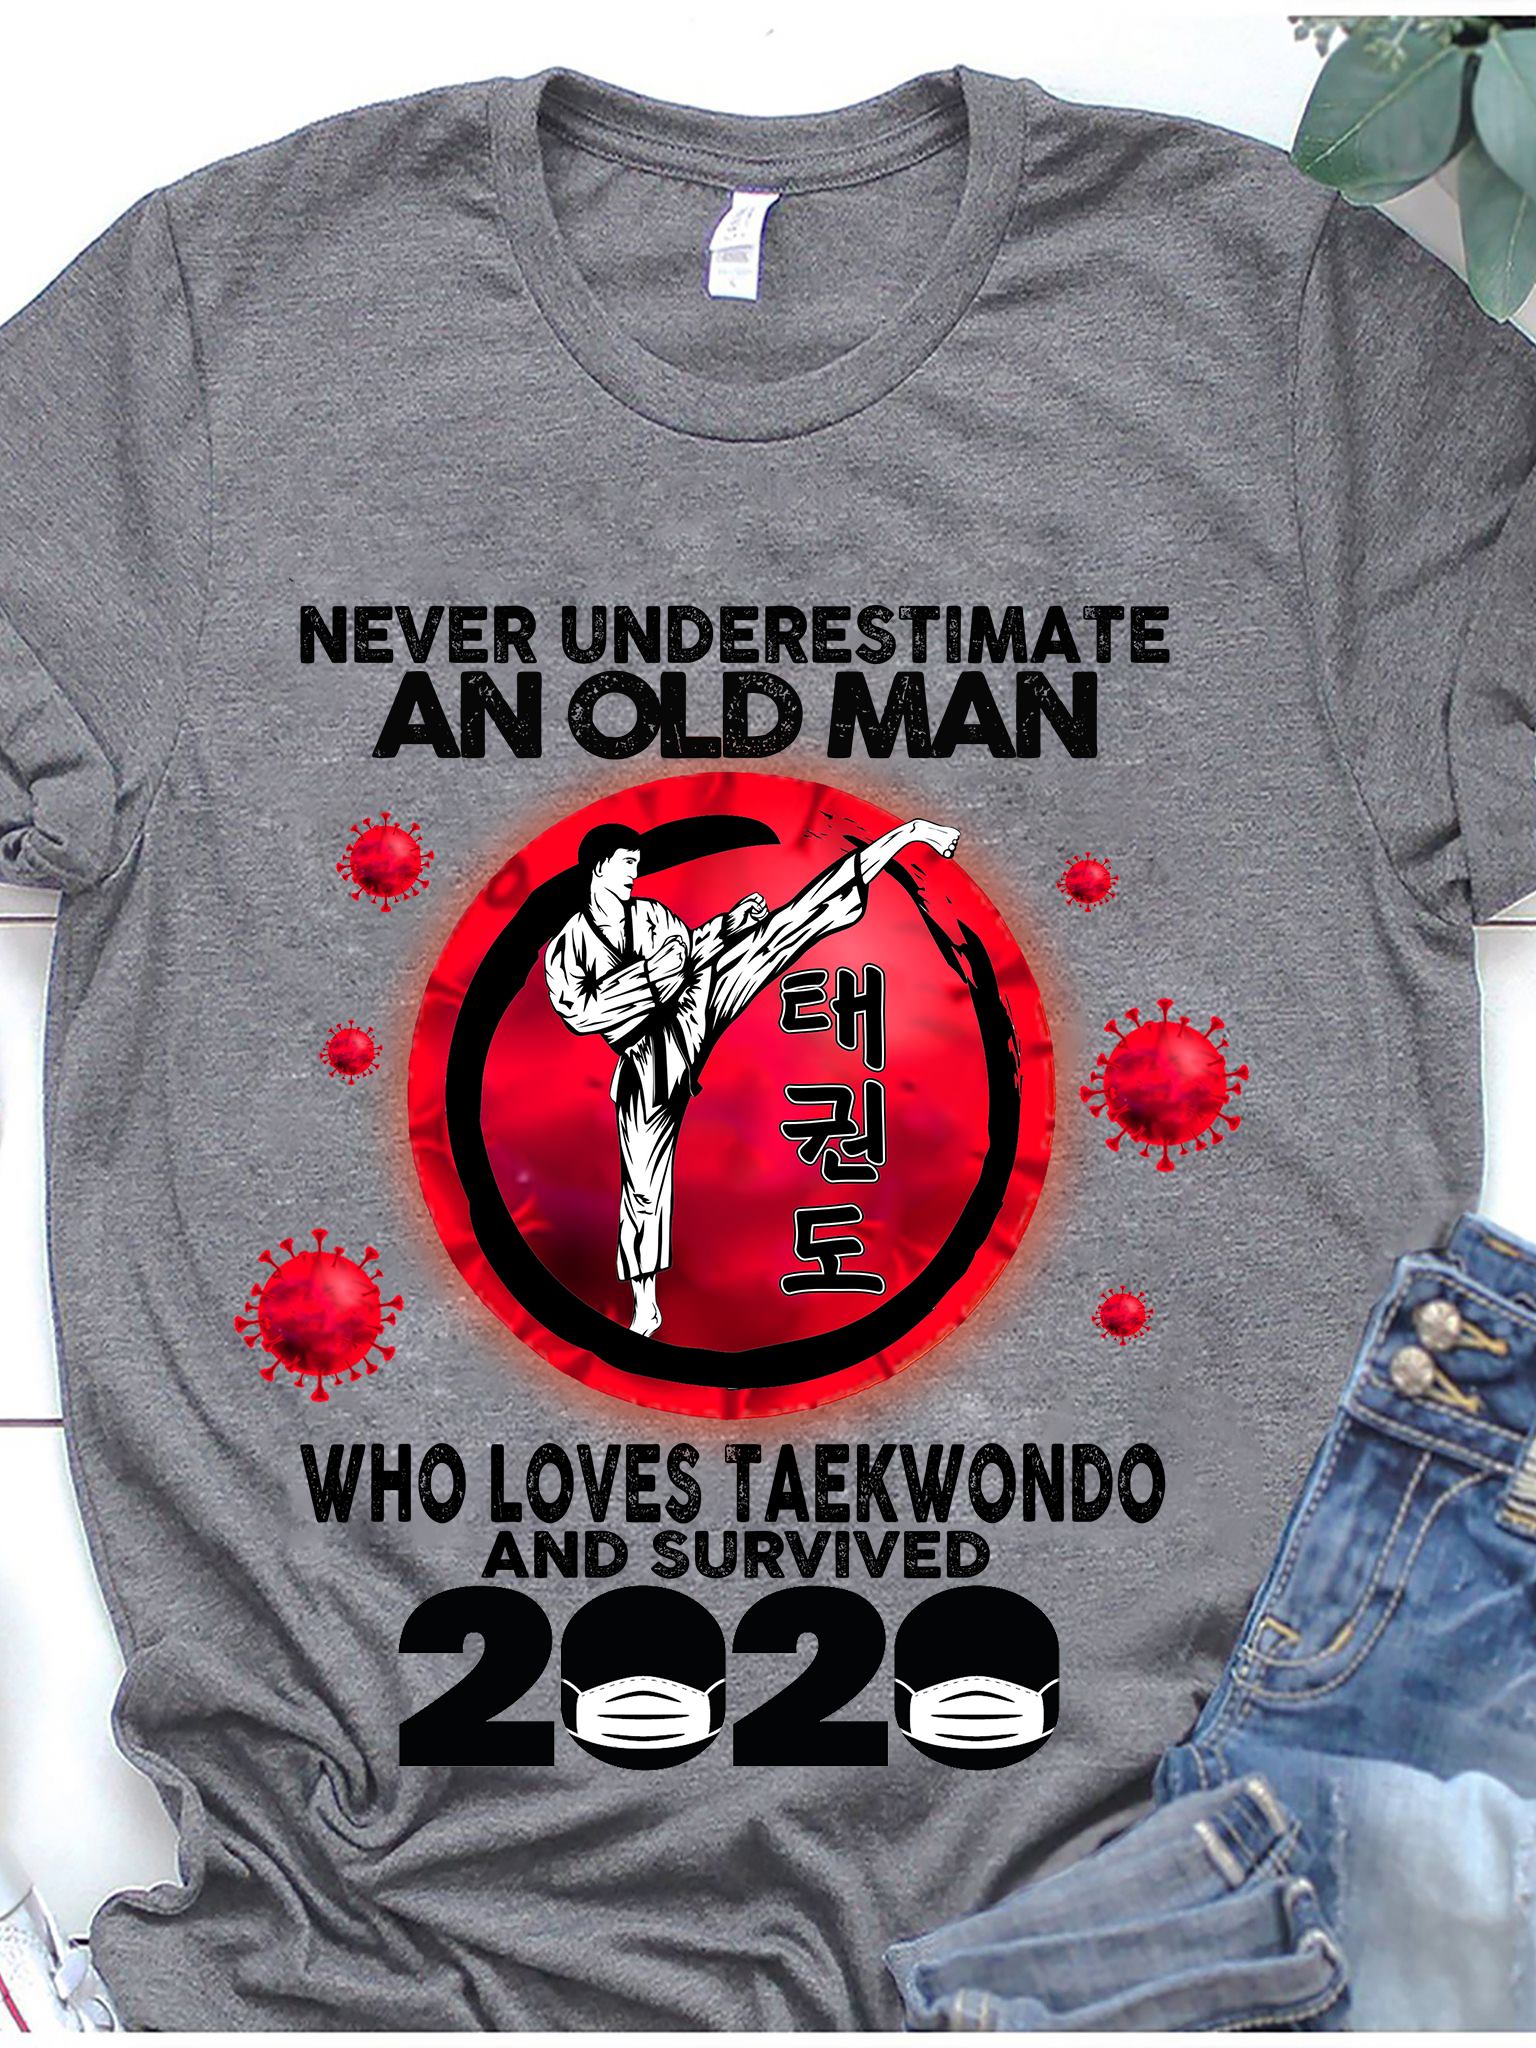 Never underestimate an old man who loves taekwondo and survived 2020